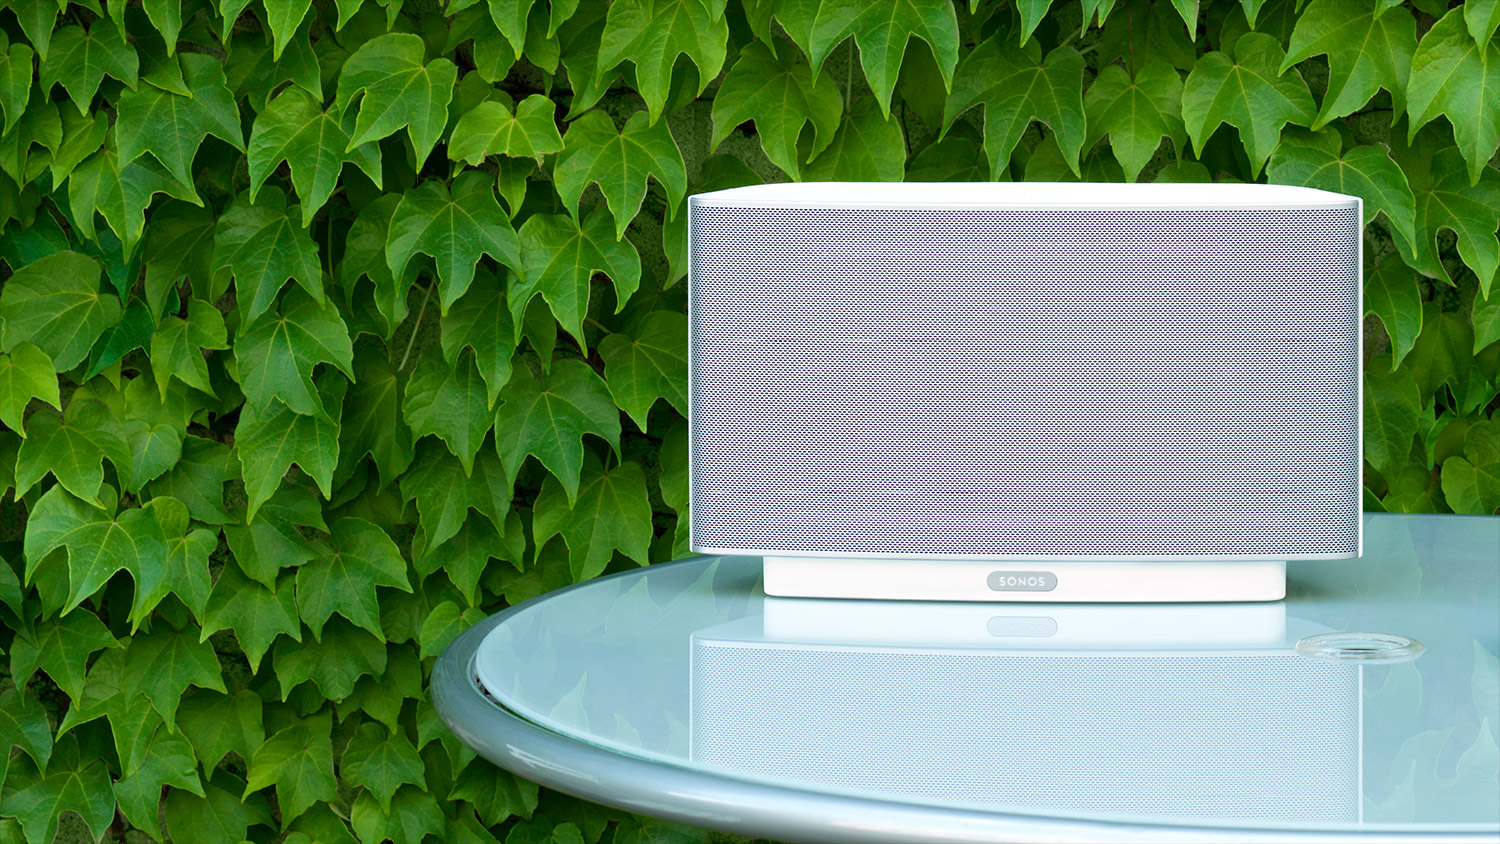 REVIEW: Sonos PLAY:5 Wireless Speaker in the Future